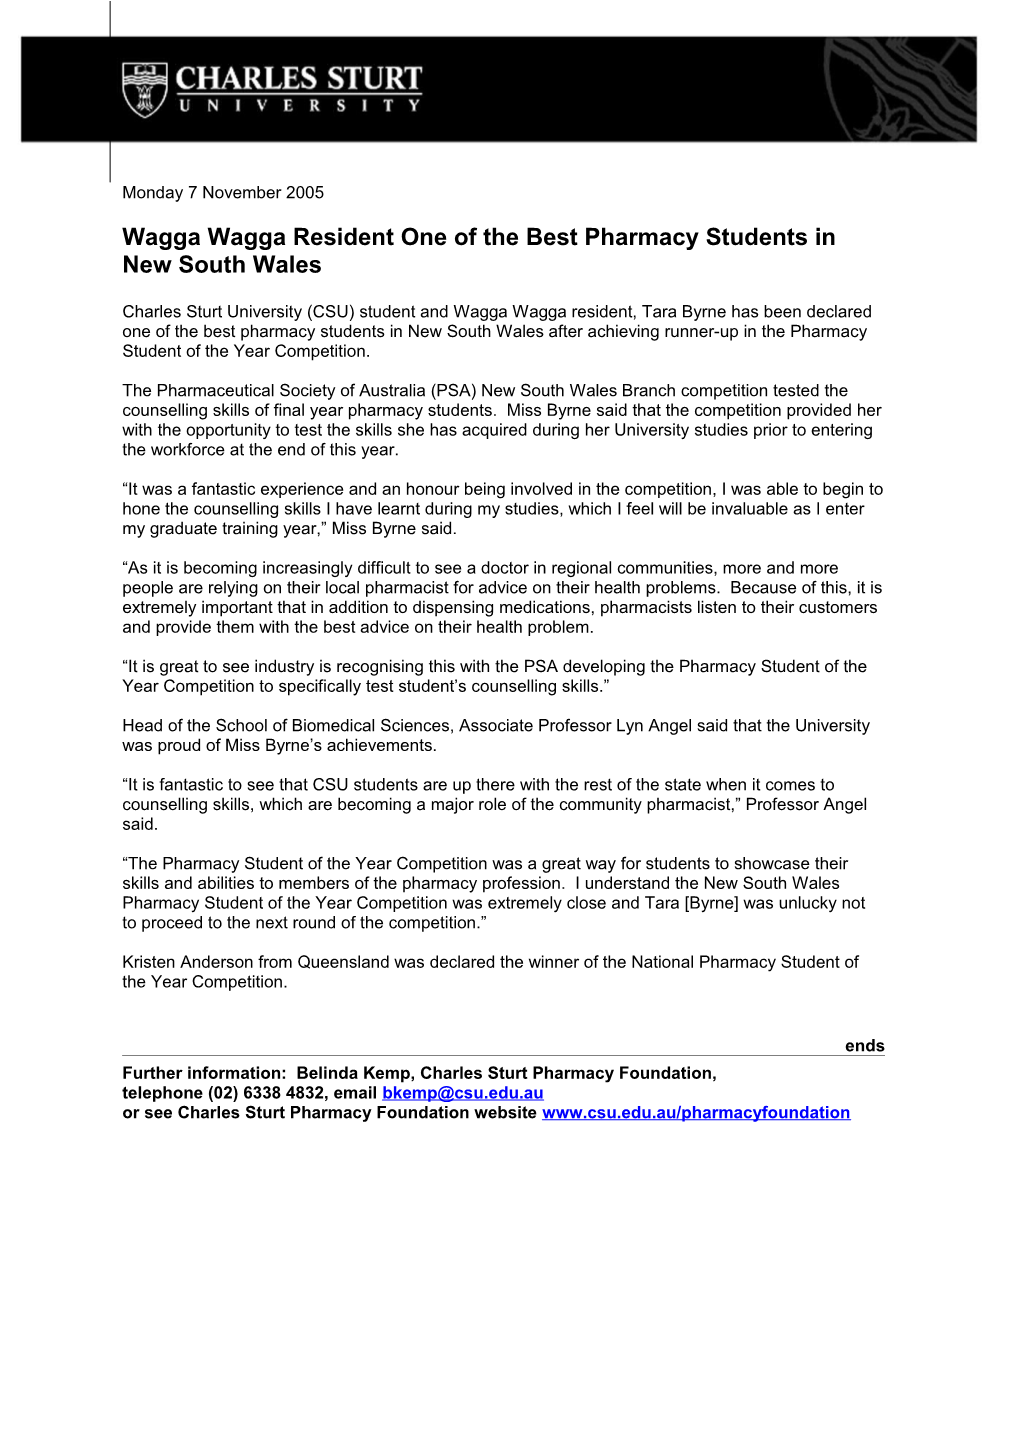 Wagga Wagga Resident One of the Best Pharmacy Students in New South Wales